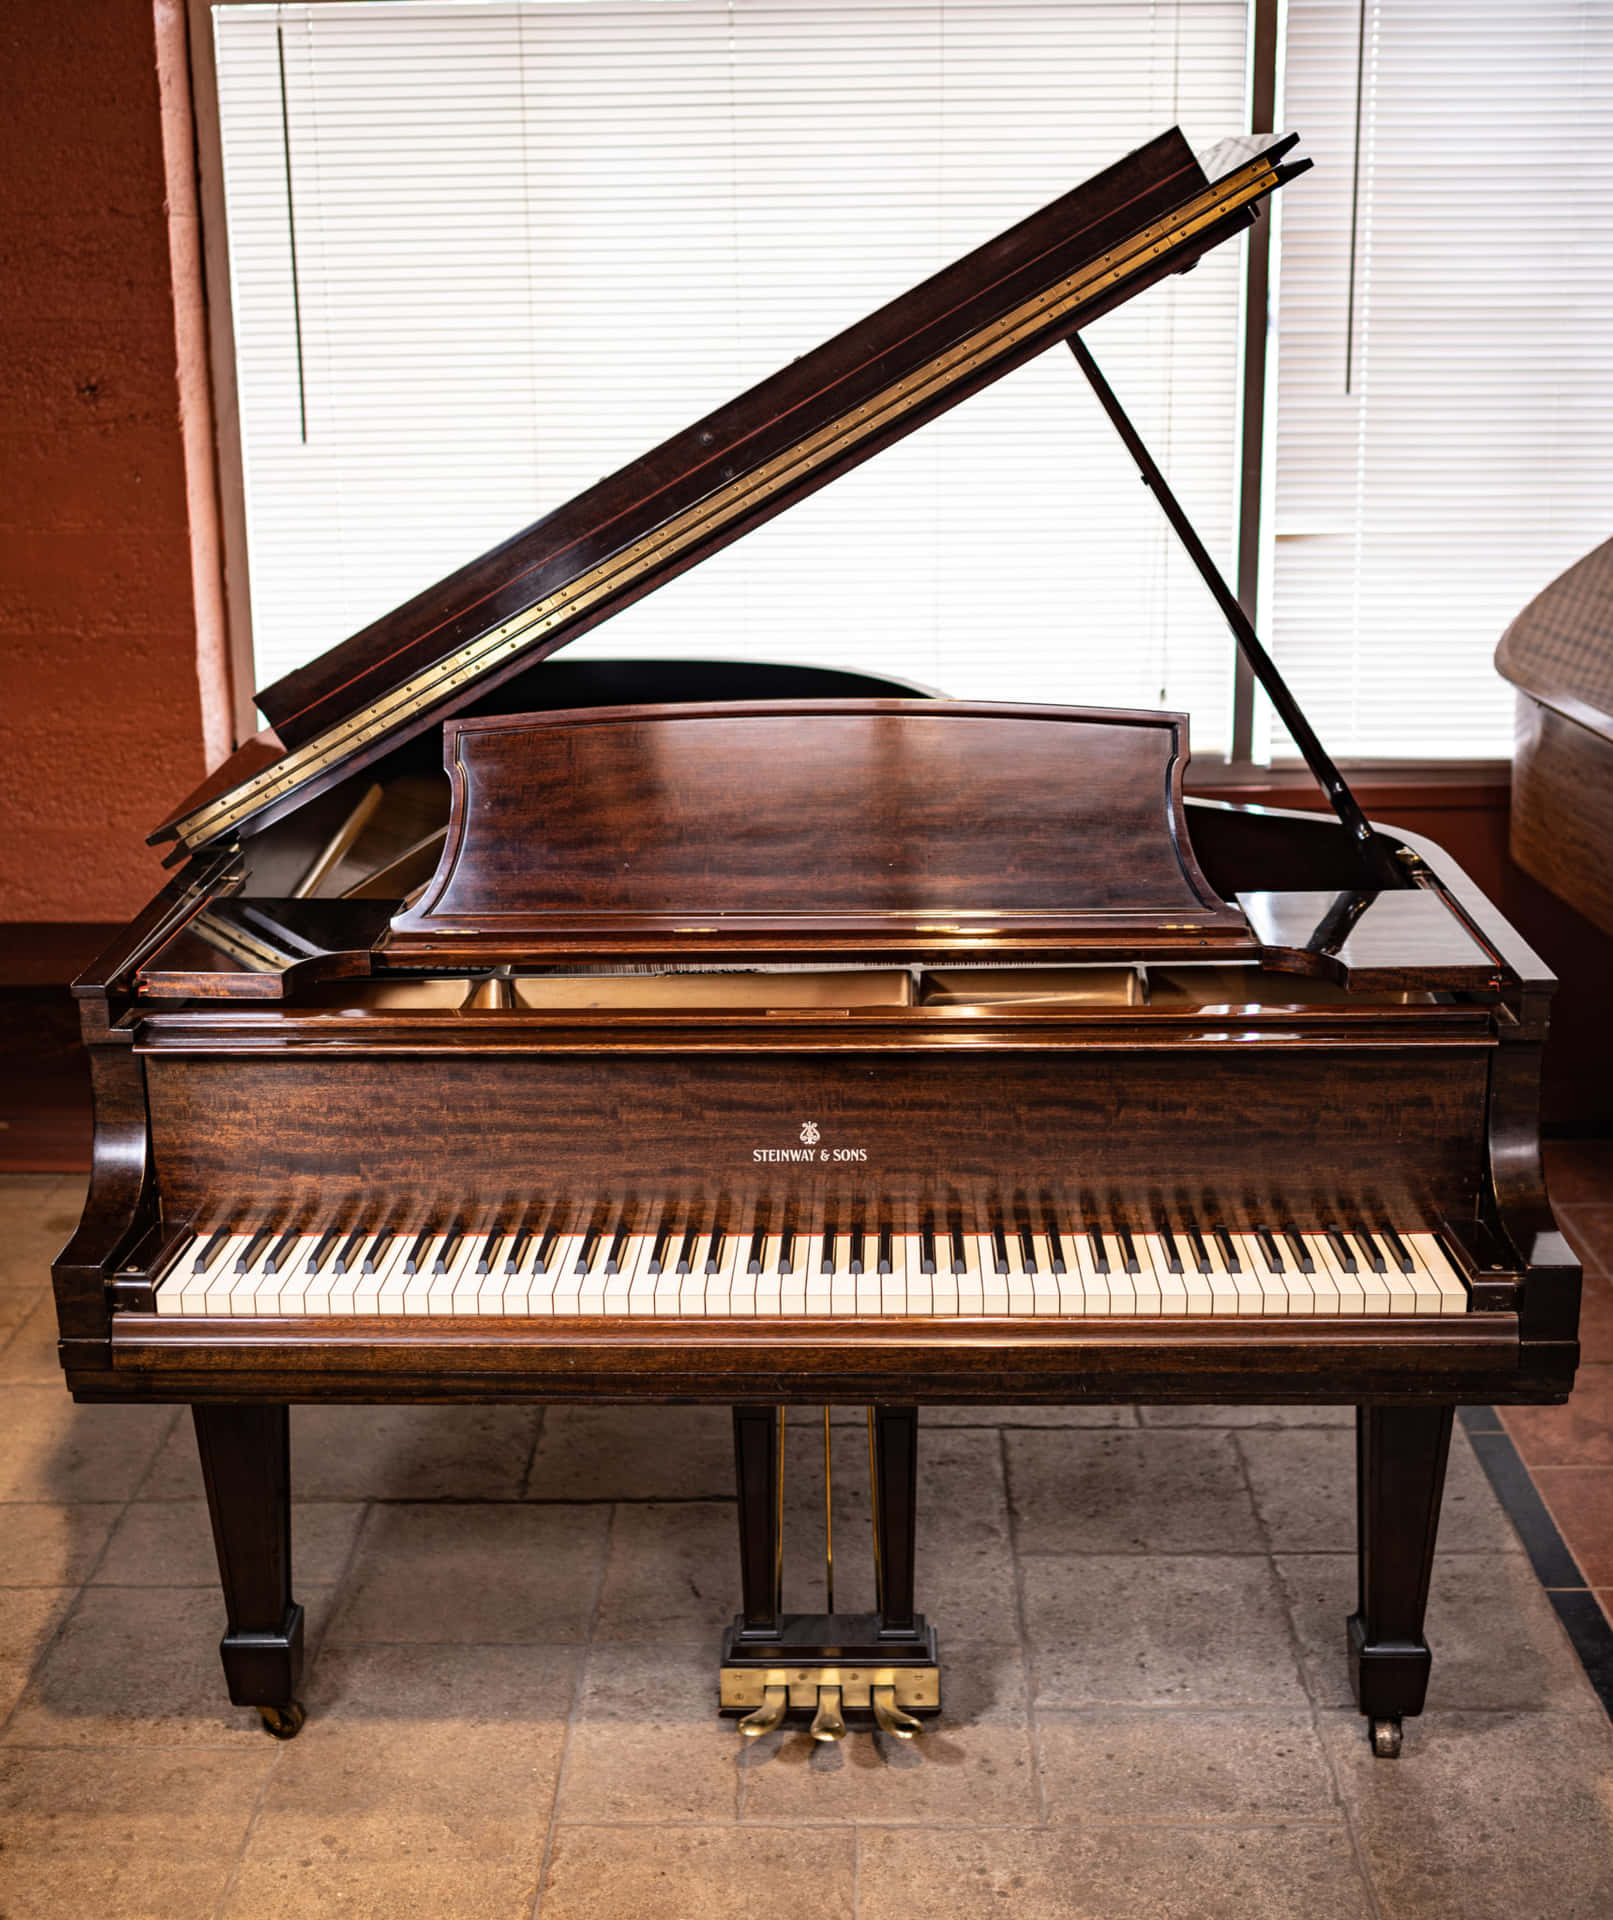 The sound of music: A beautiful grand piano ready to be played